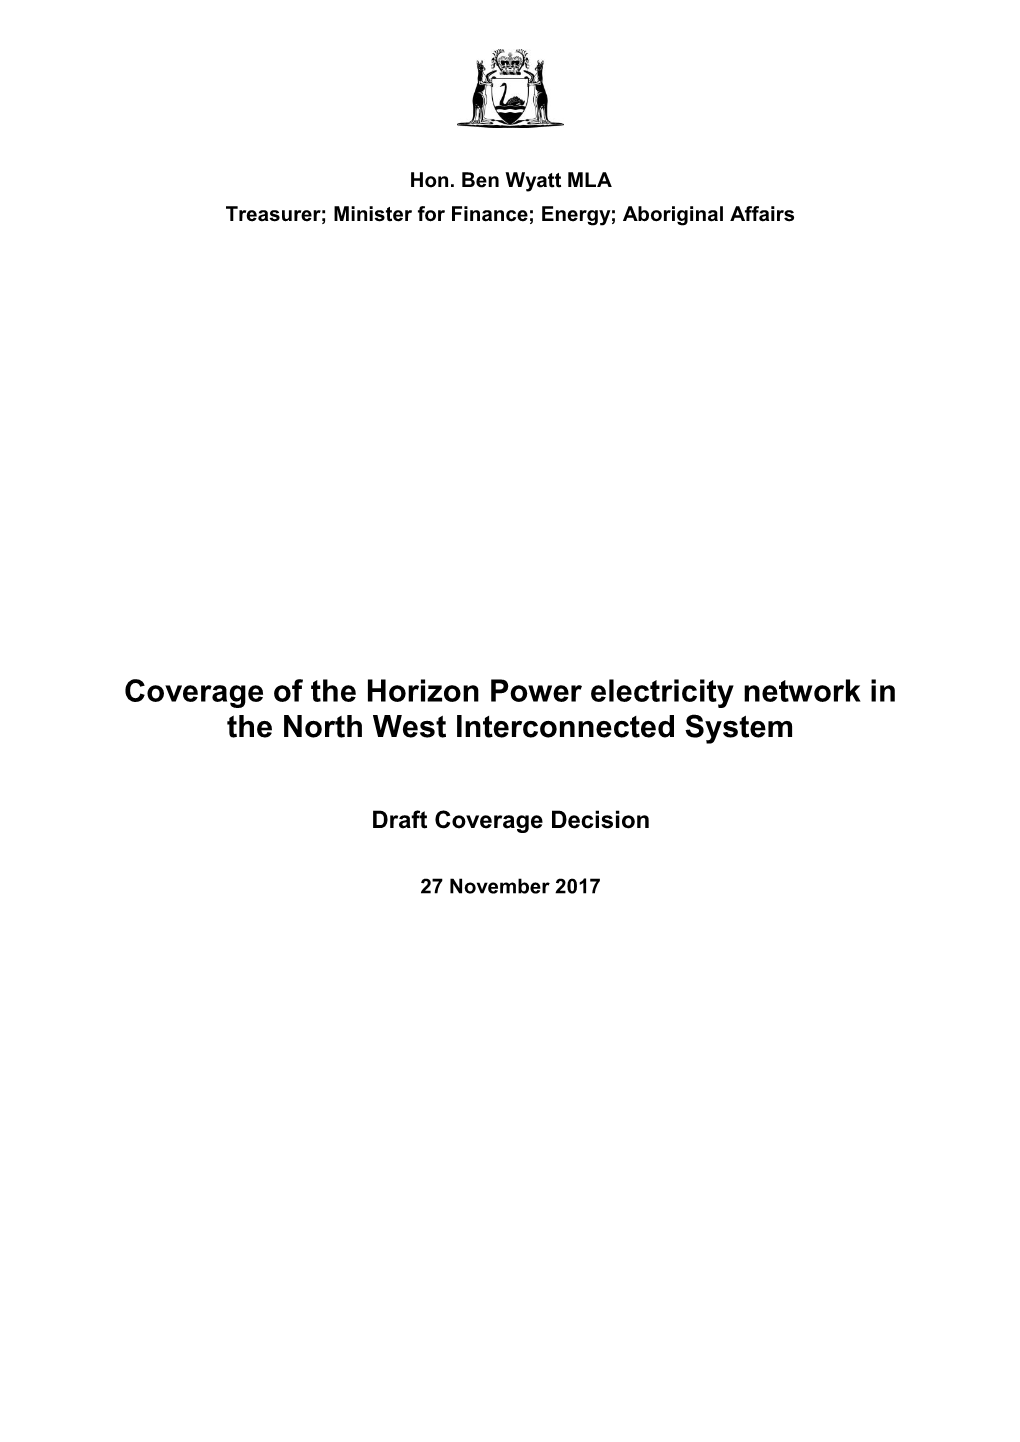 Coverage of the Horizon Power Electricity Network in the North West Interconnected System